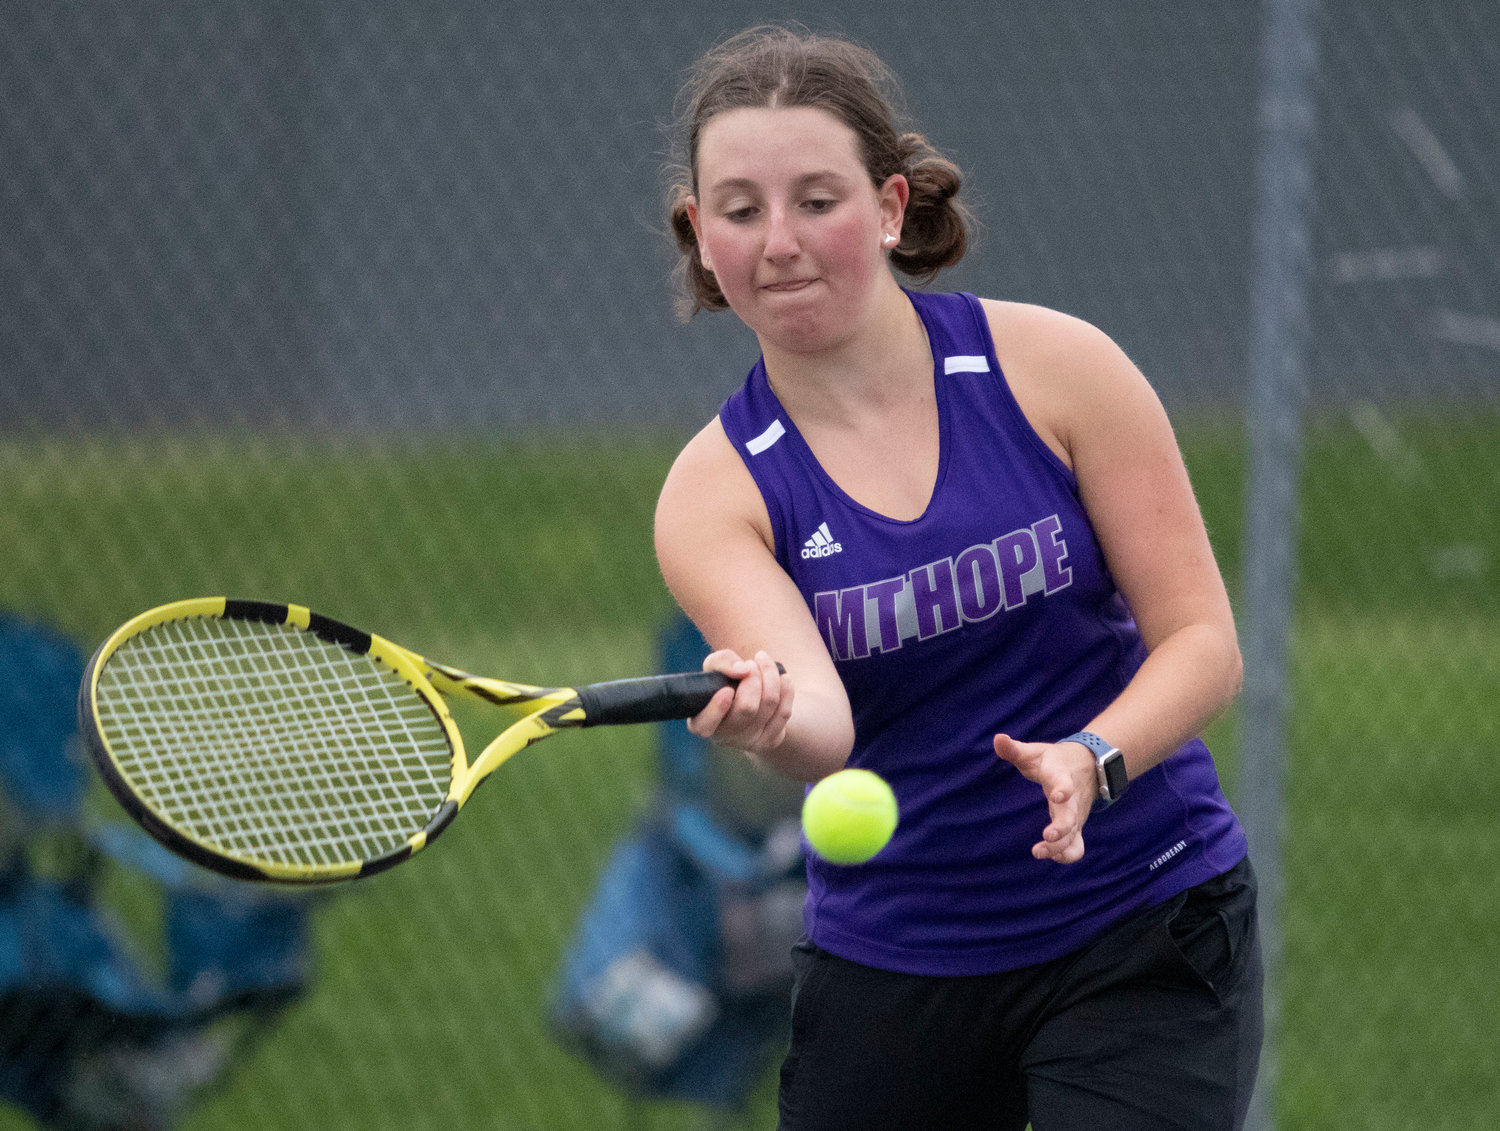 Junior captain Cate Merriam hits a forehand during her match against Katie Byon of Barrington.